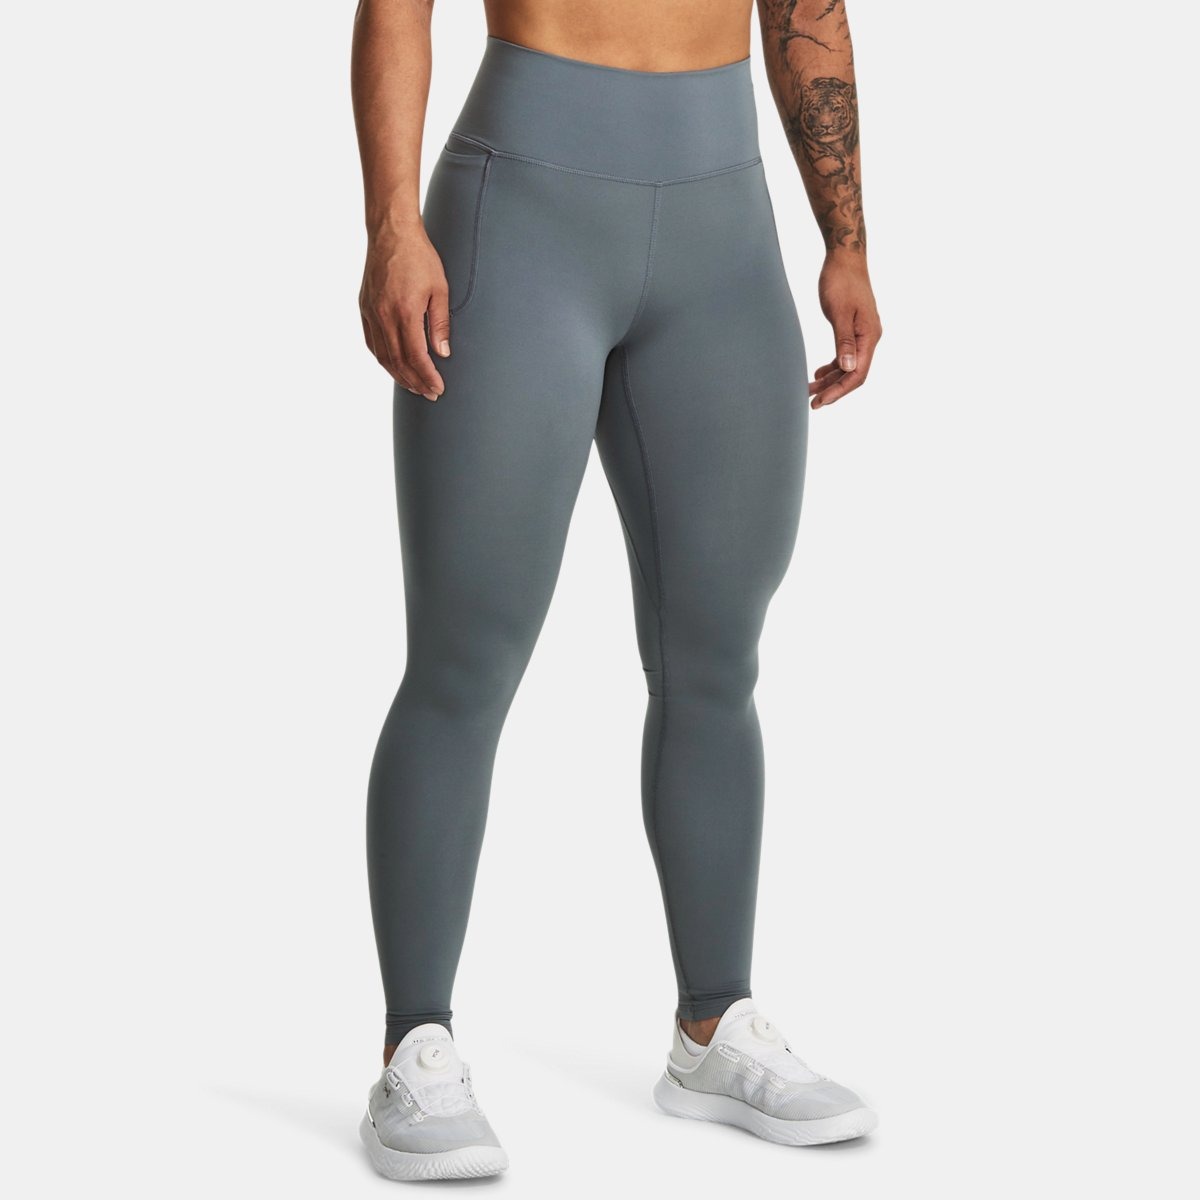 Leggings in Grey from Under Armour GOOFASH